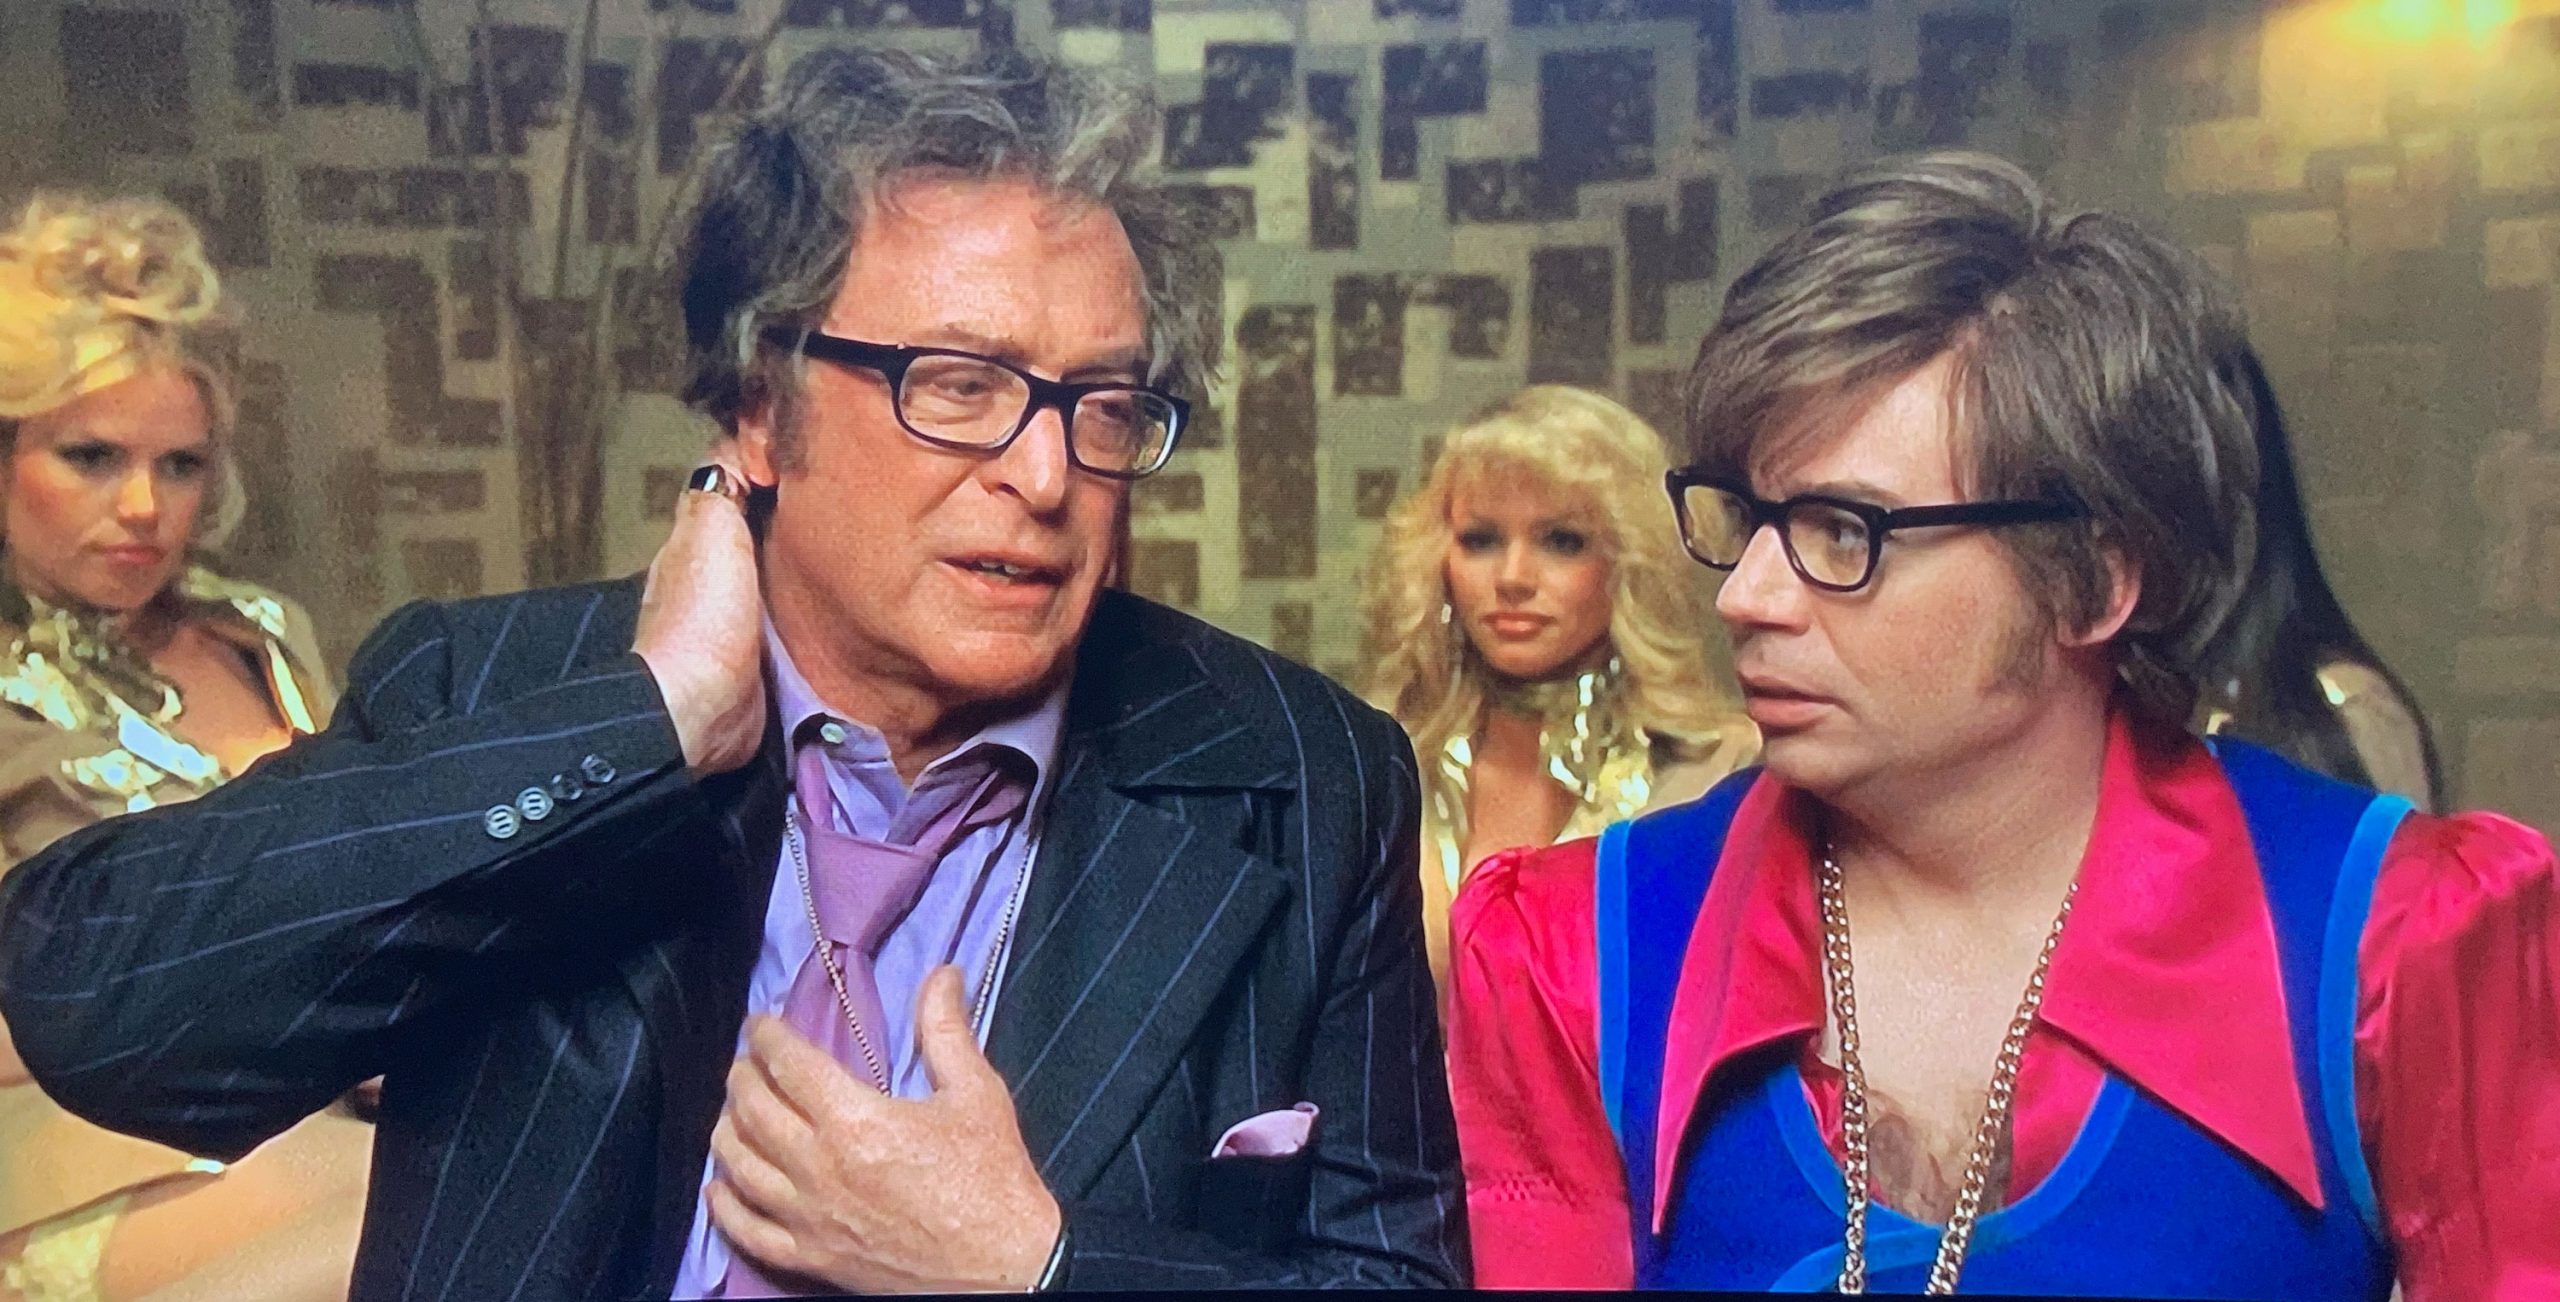 Michael Caine goldmember mike myers 